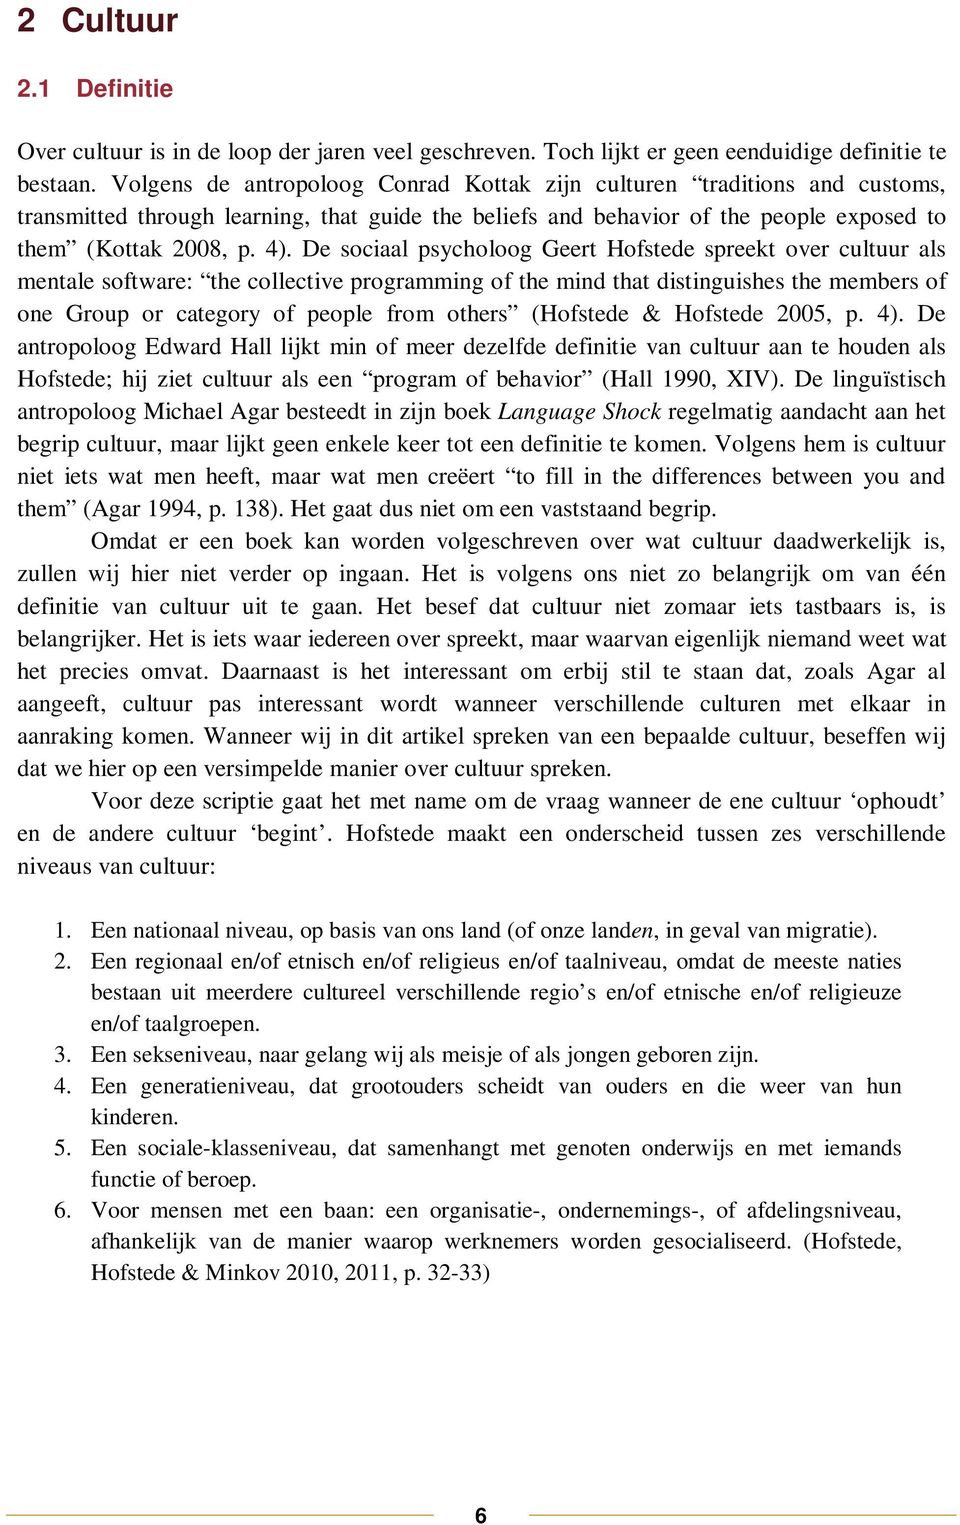 De sociaal psycholoog Geert Hofstede spreekt over cultuur als mentale software: the collective programming of the mind that distinguishes the members of one Group or category of people from others